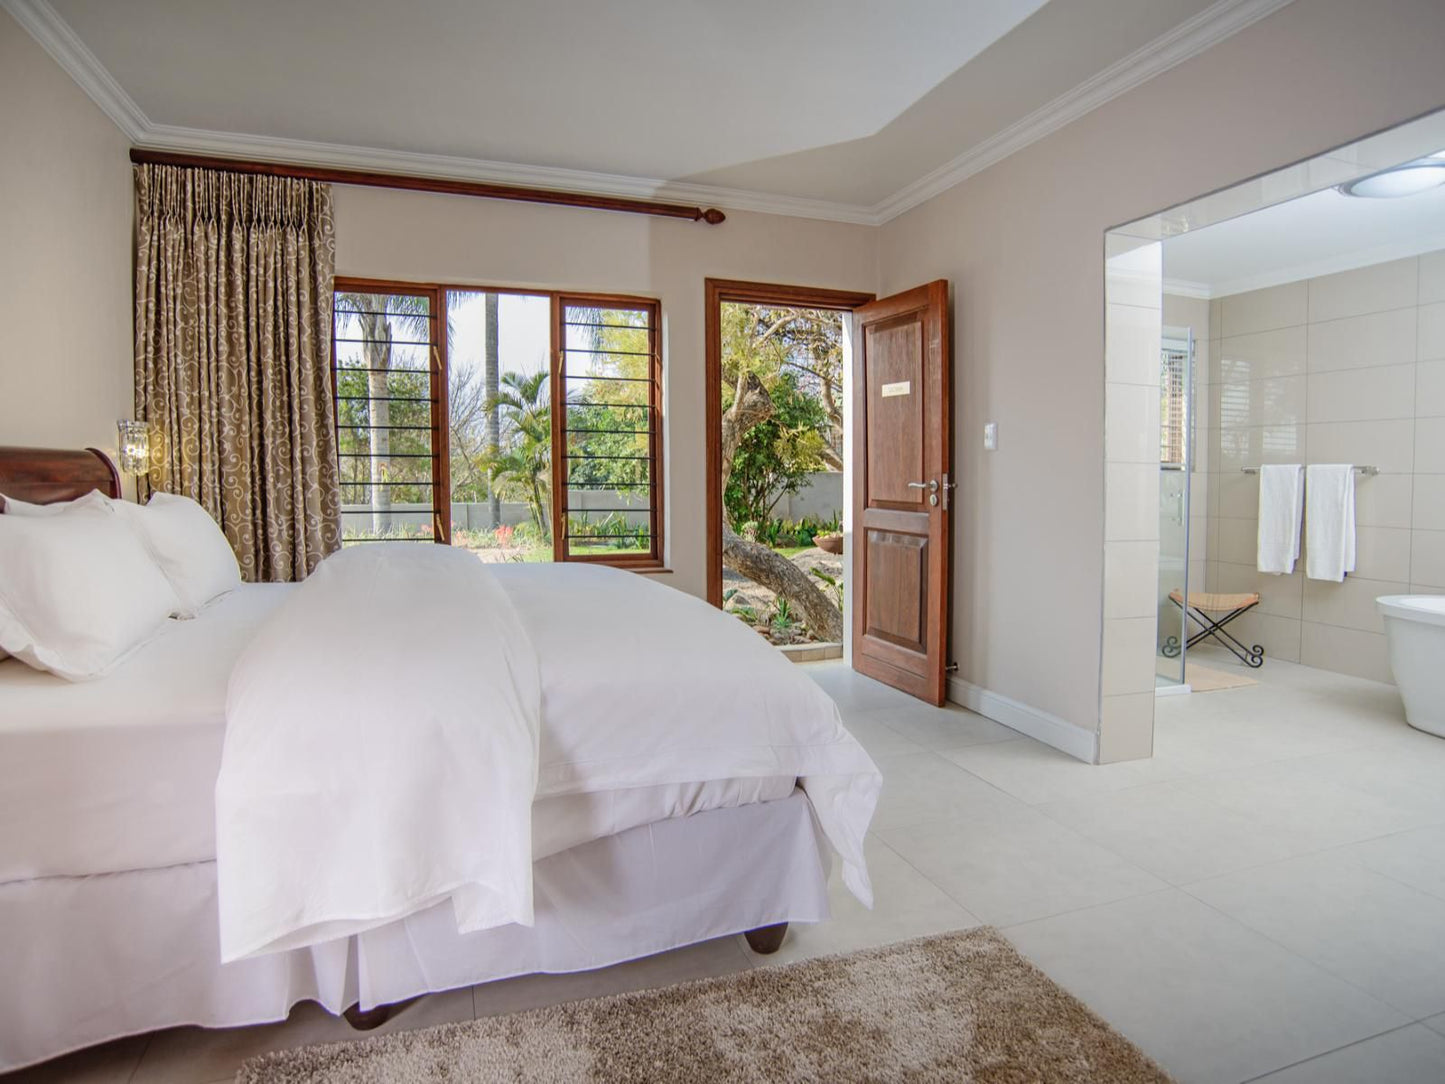 Leaves Lodge And Spa Nelspruit Mpumalanga South Africa Unsaturated, Bedroom